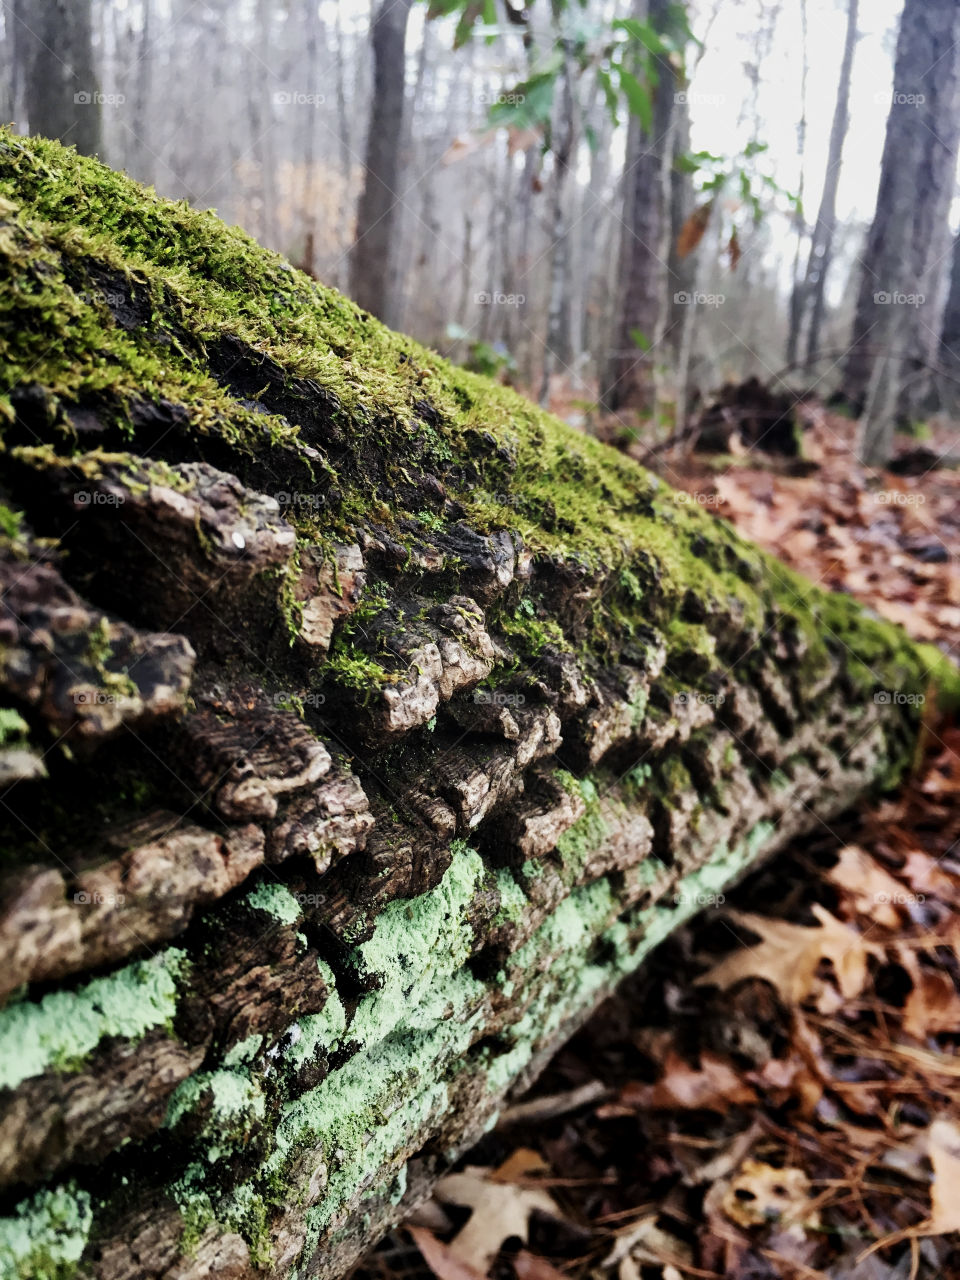 An old downed tree in the forest. Detailed view reveals the organic textures of bark, moss, and lichen. 